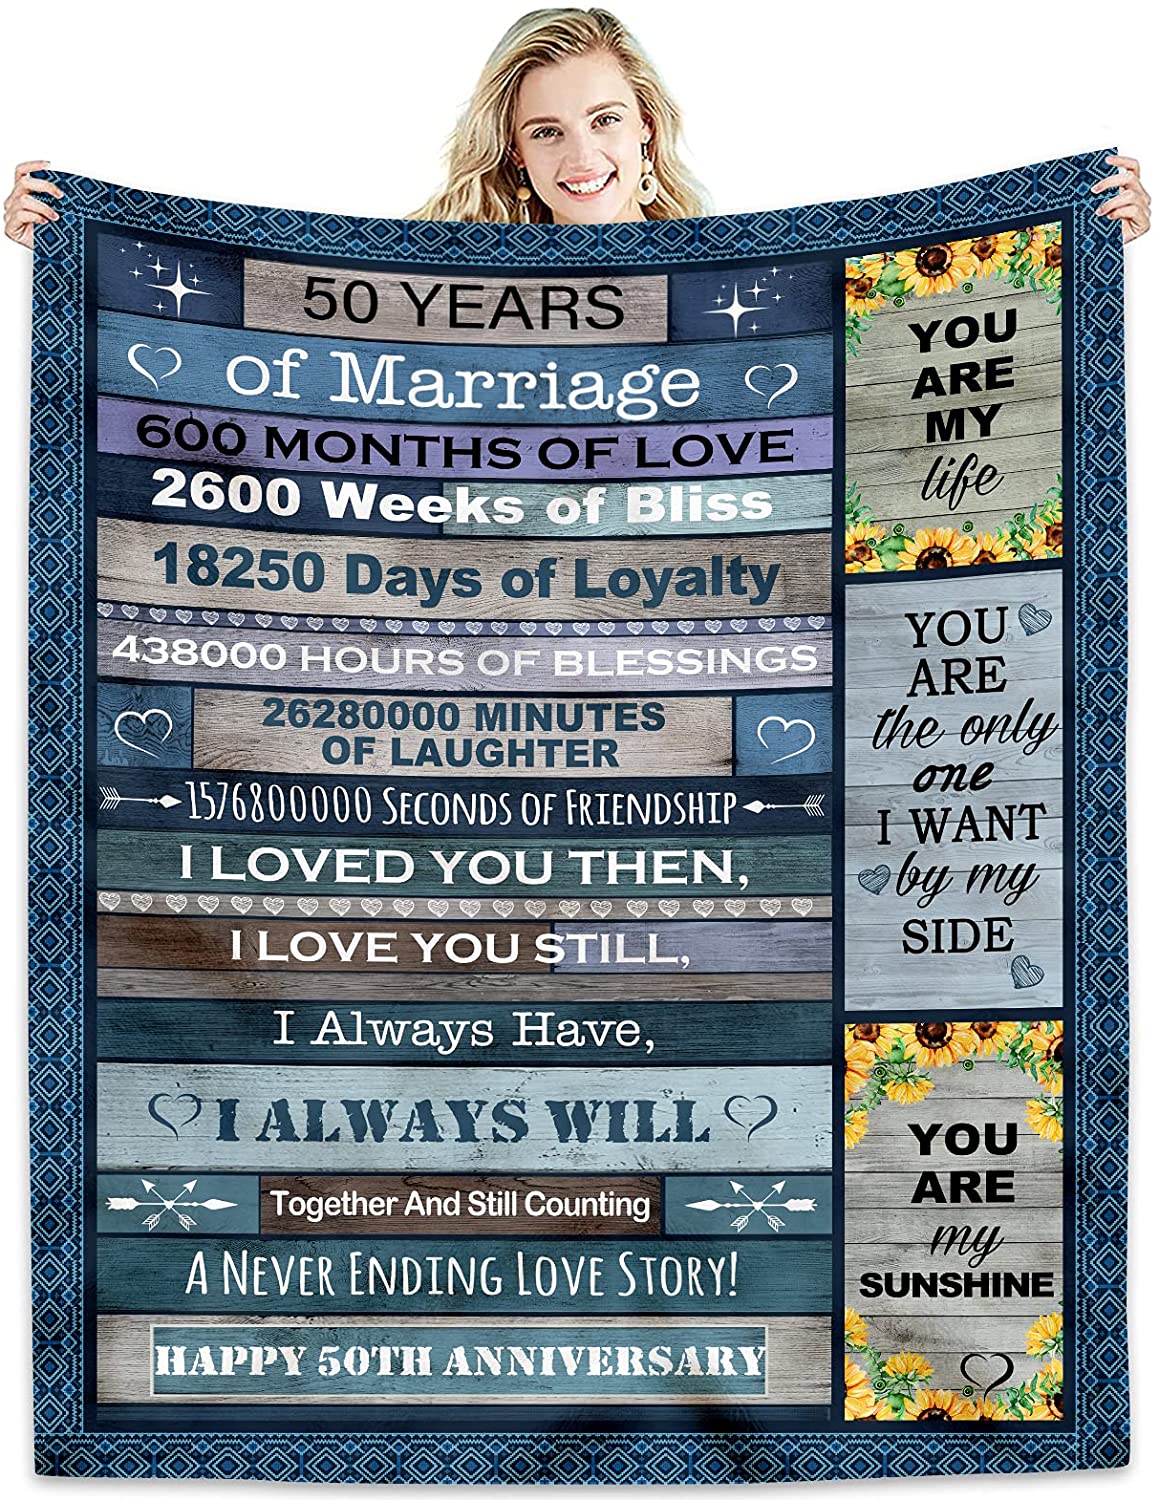 Happy 50th Anniversary Gift for Couple/Parents | 50th anniversary gifts, 50 wedding  anniversary gifts, Anniversary gifts for parents